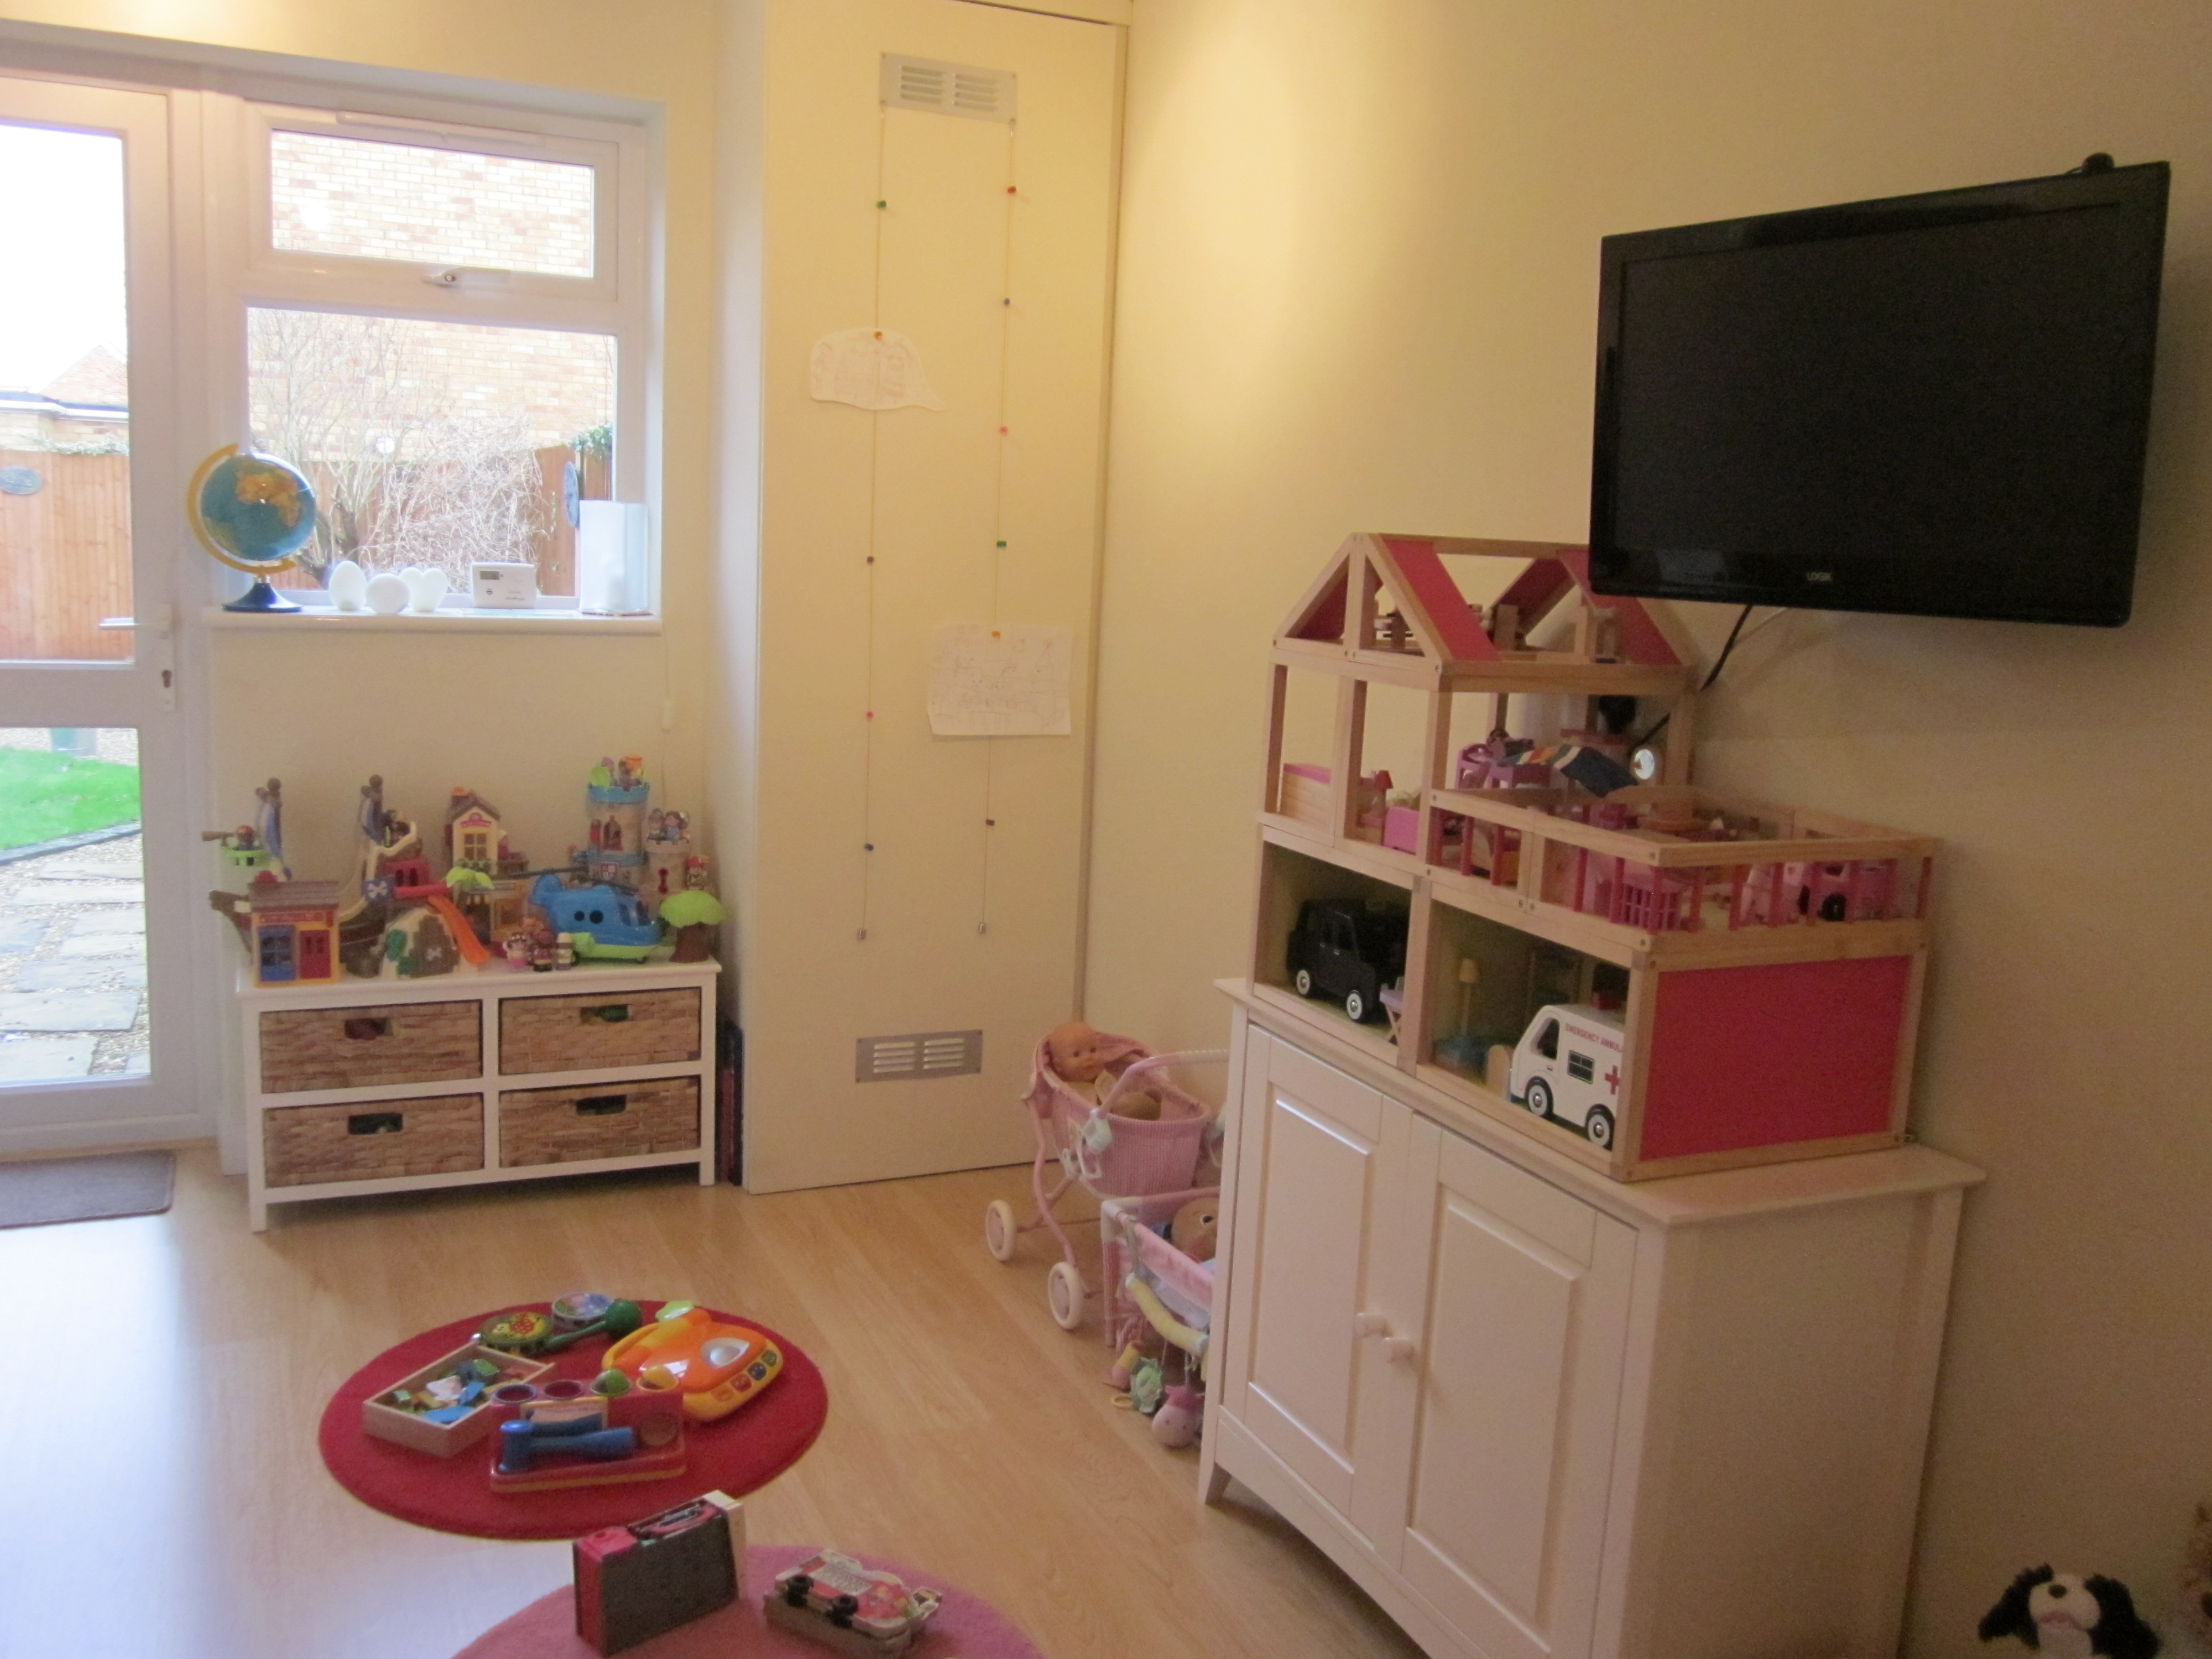 The new play area with door leading to garage.